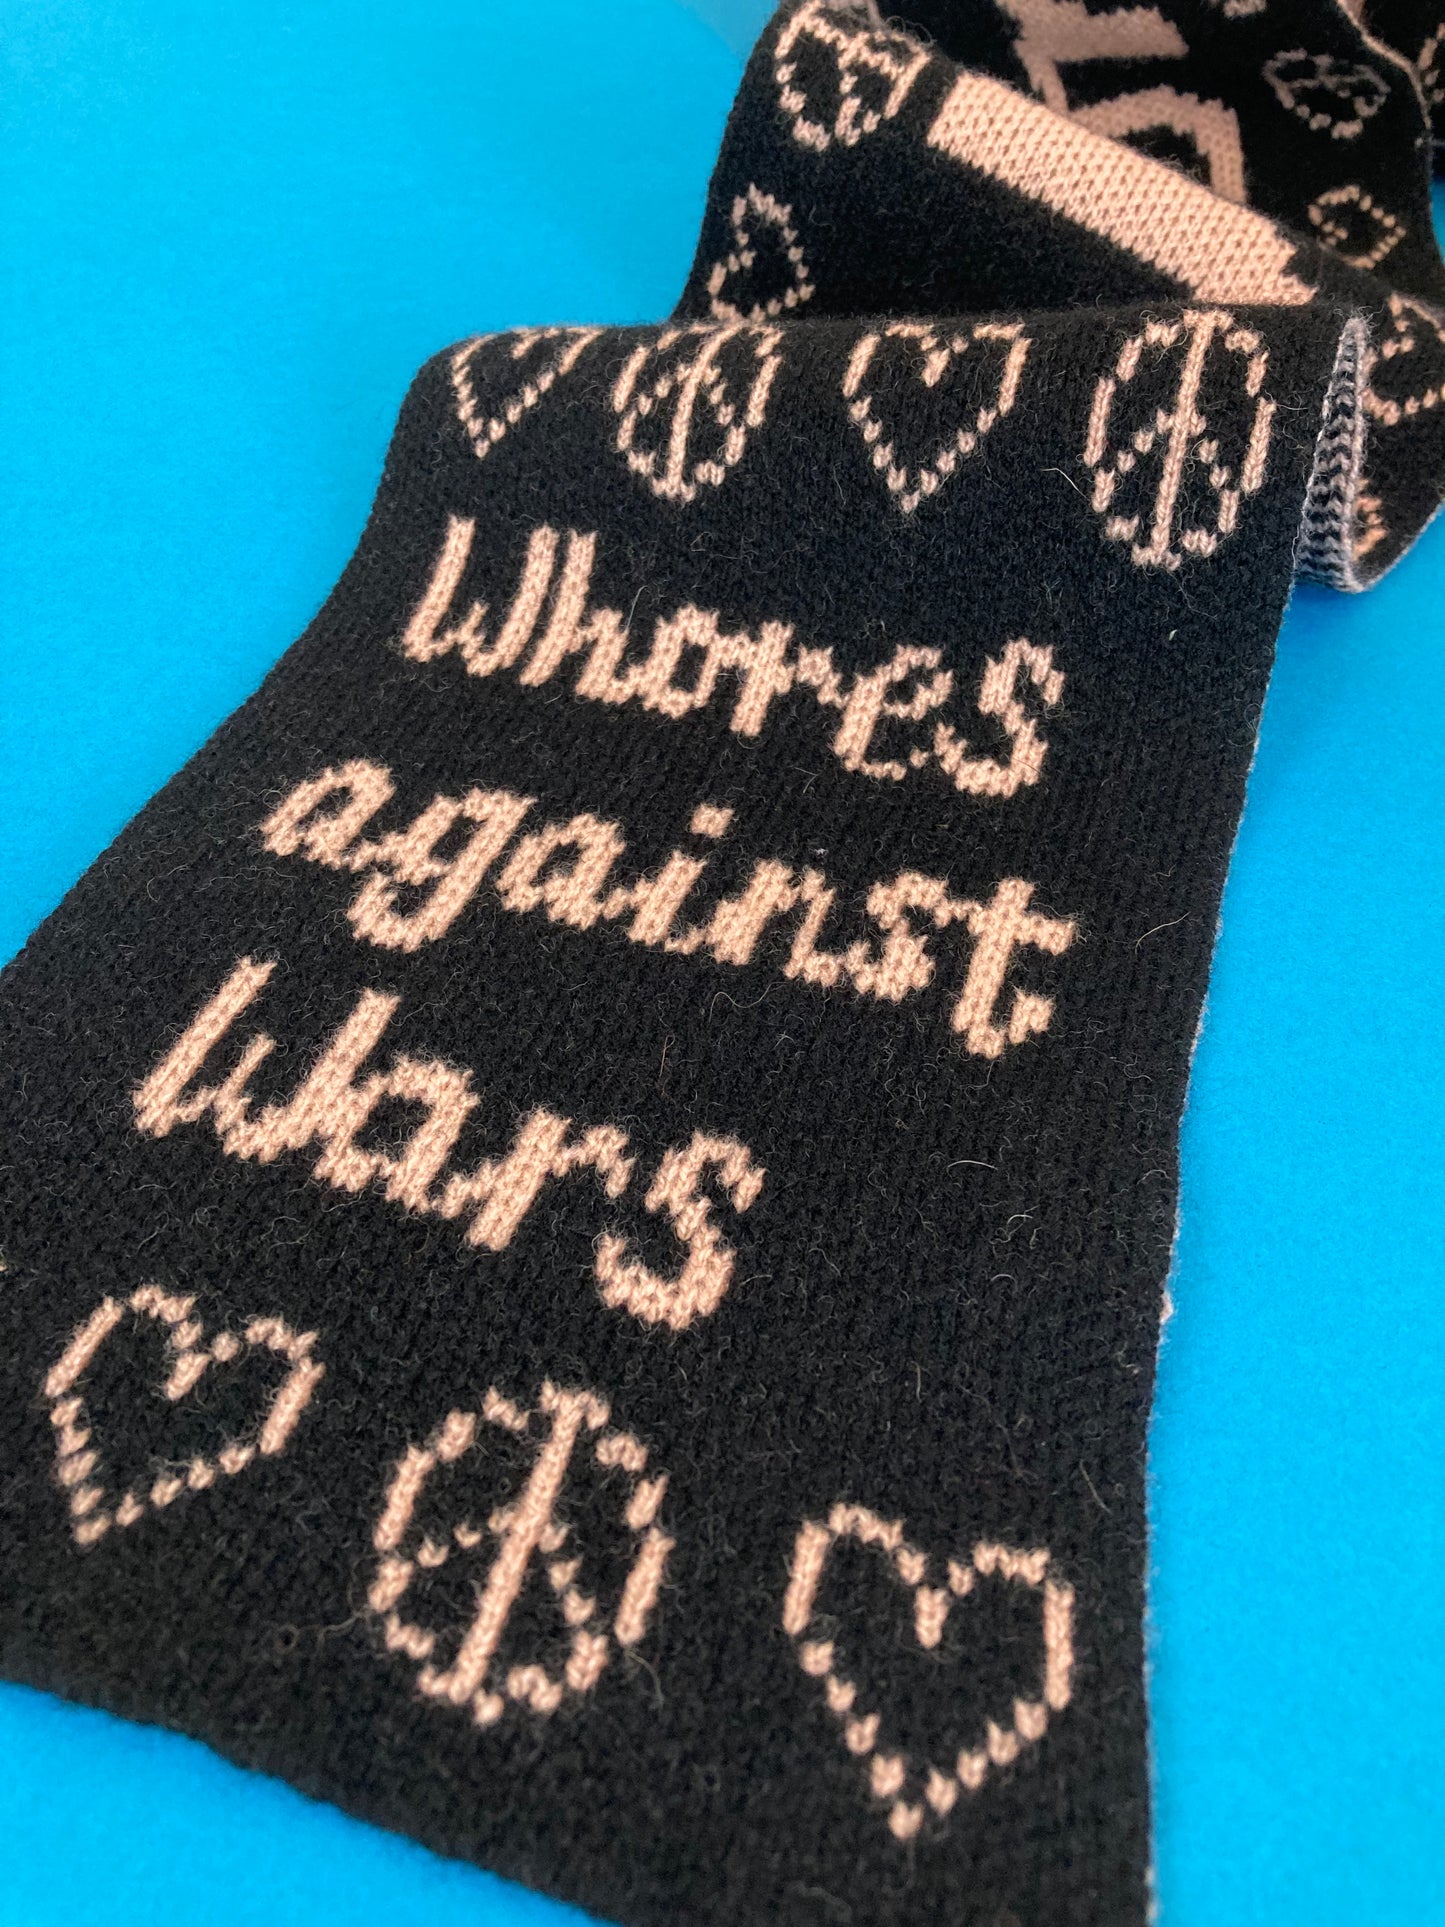 Whores against wars scarf